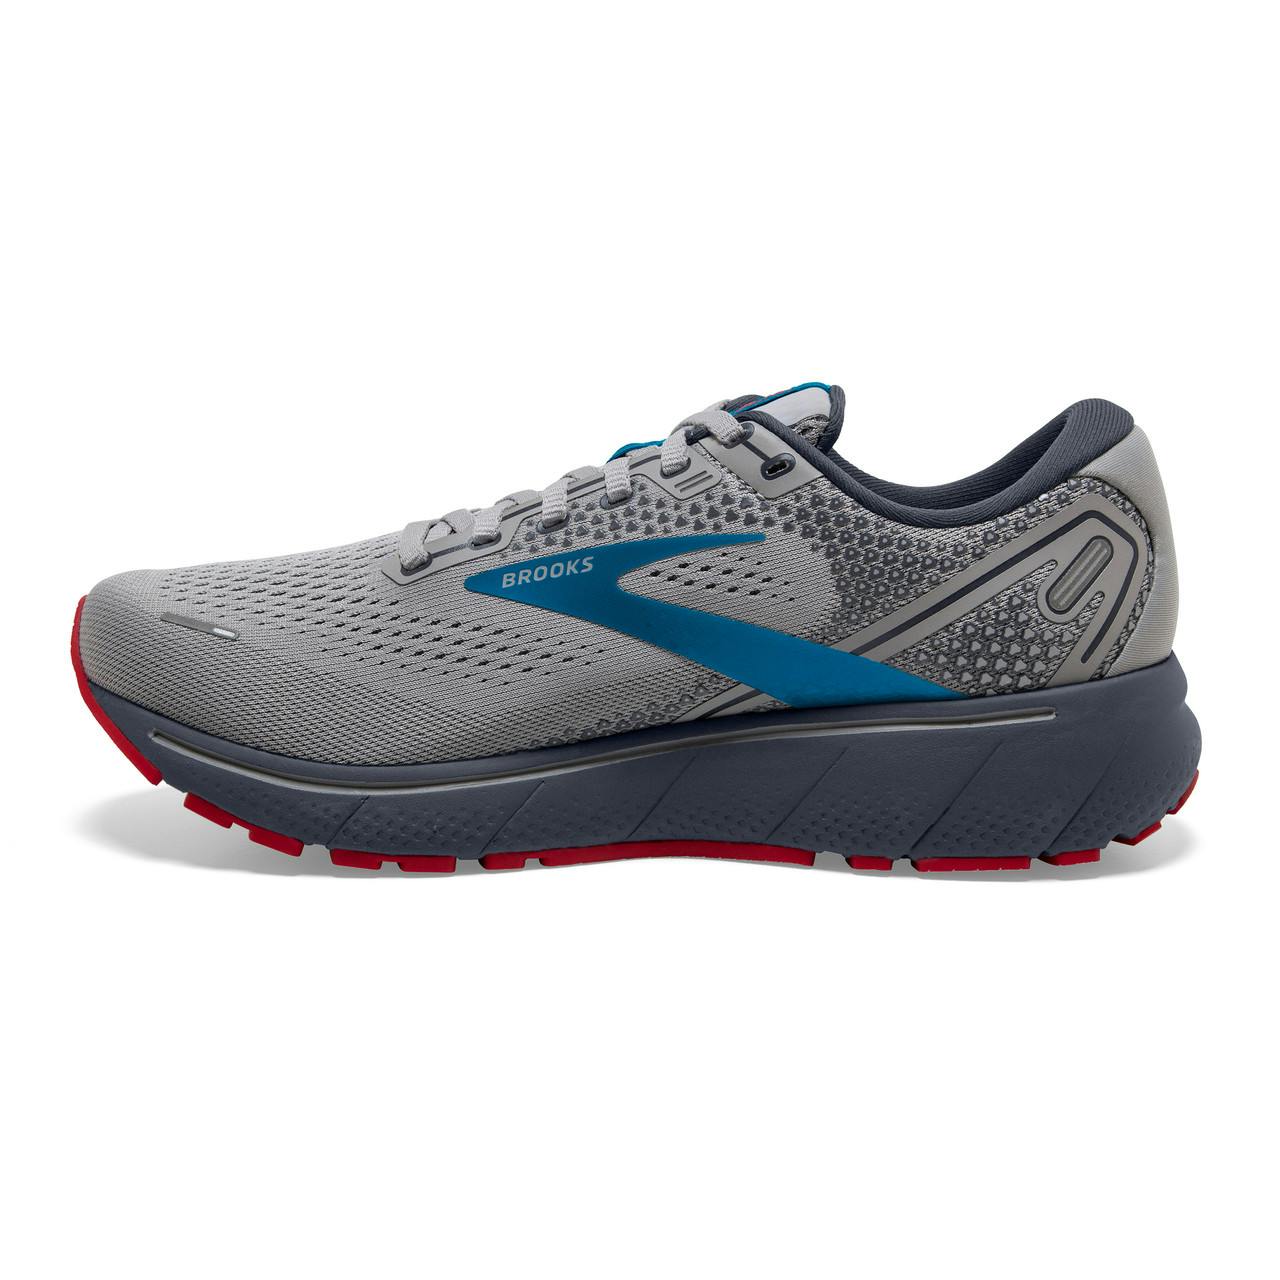 Ghost 14 Road Running Shoes Grey/Blue/Red